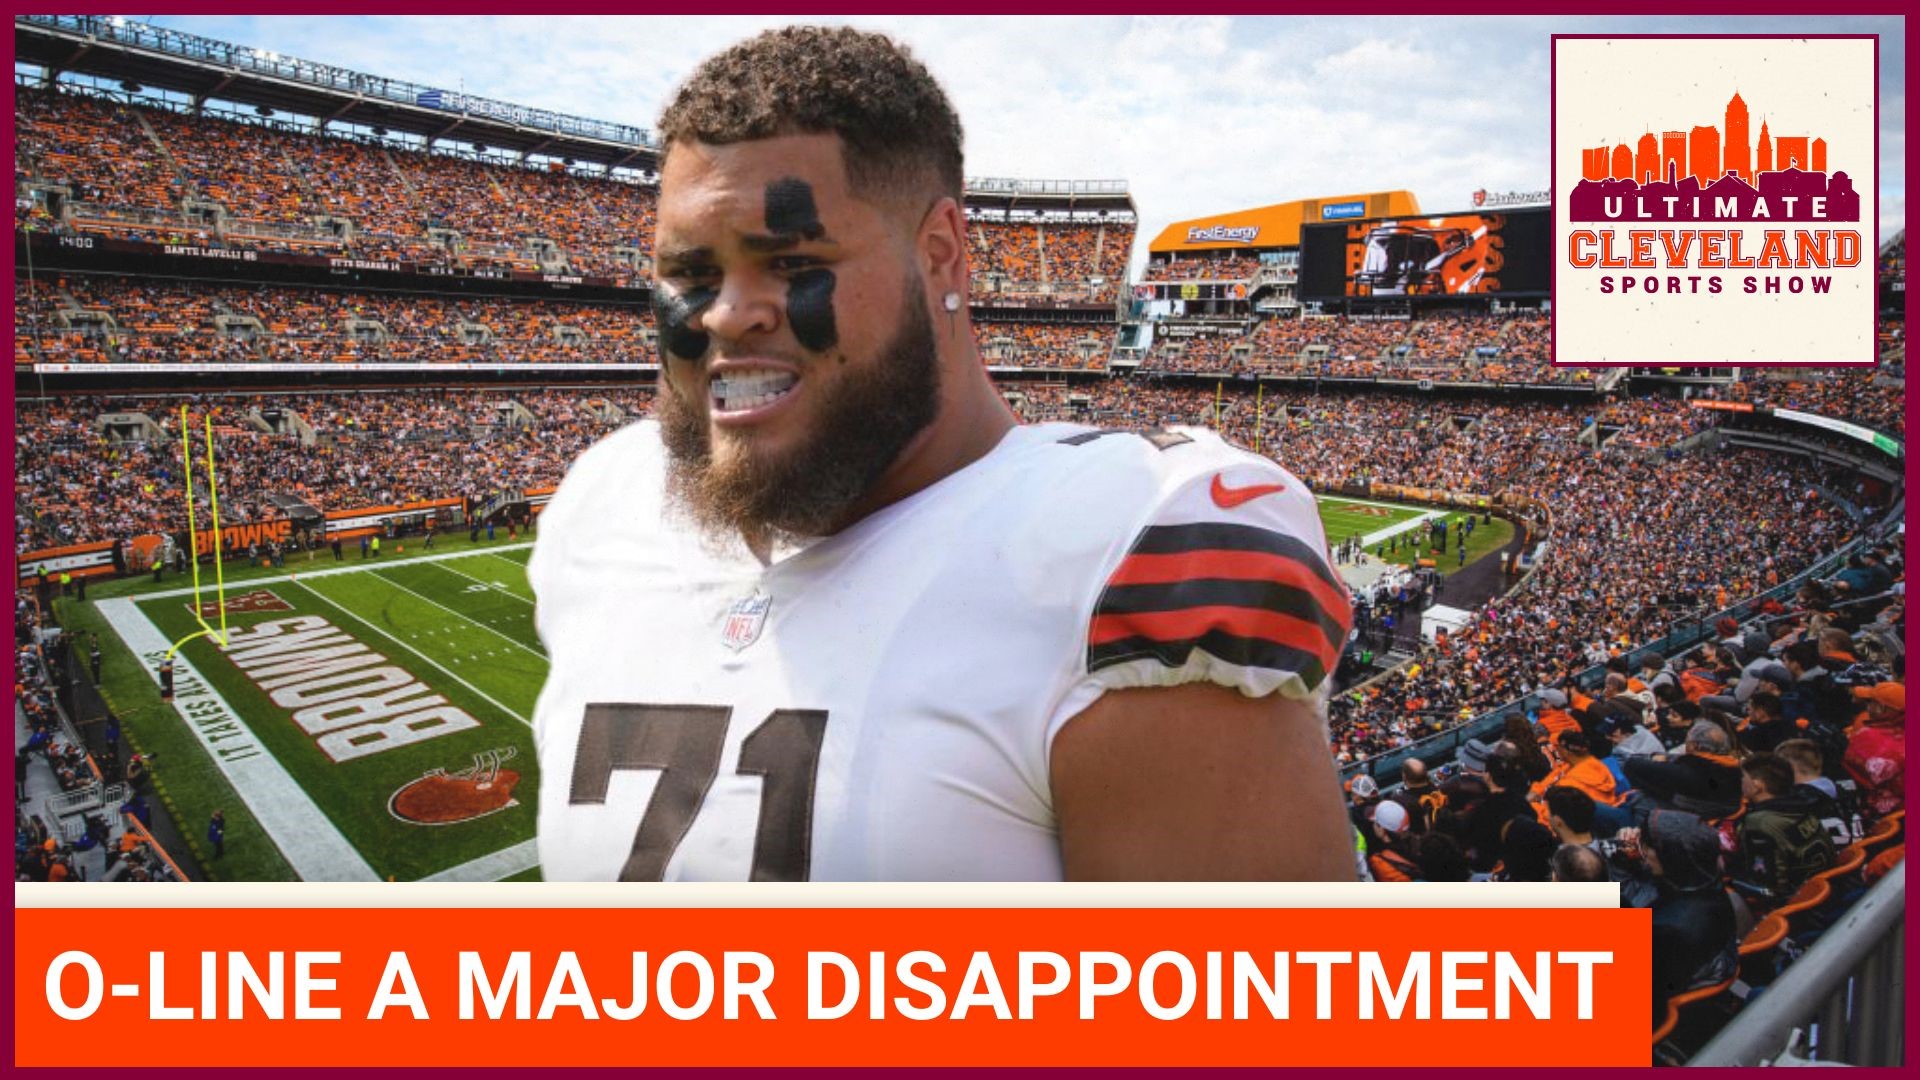 Should the Cleveland Browns replace Jed Wills Jr. as the LT due to his poor play?